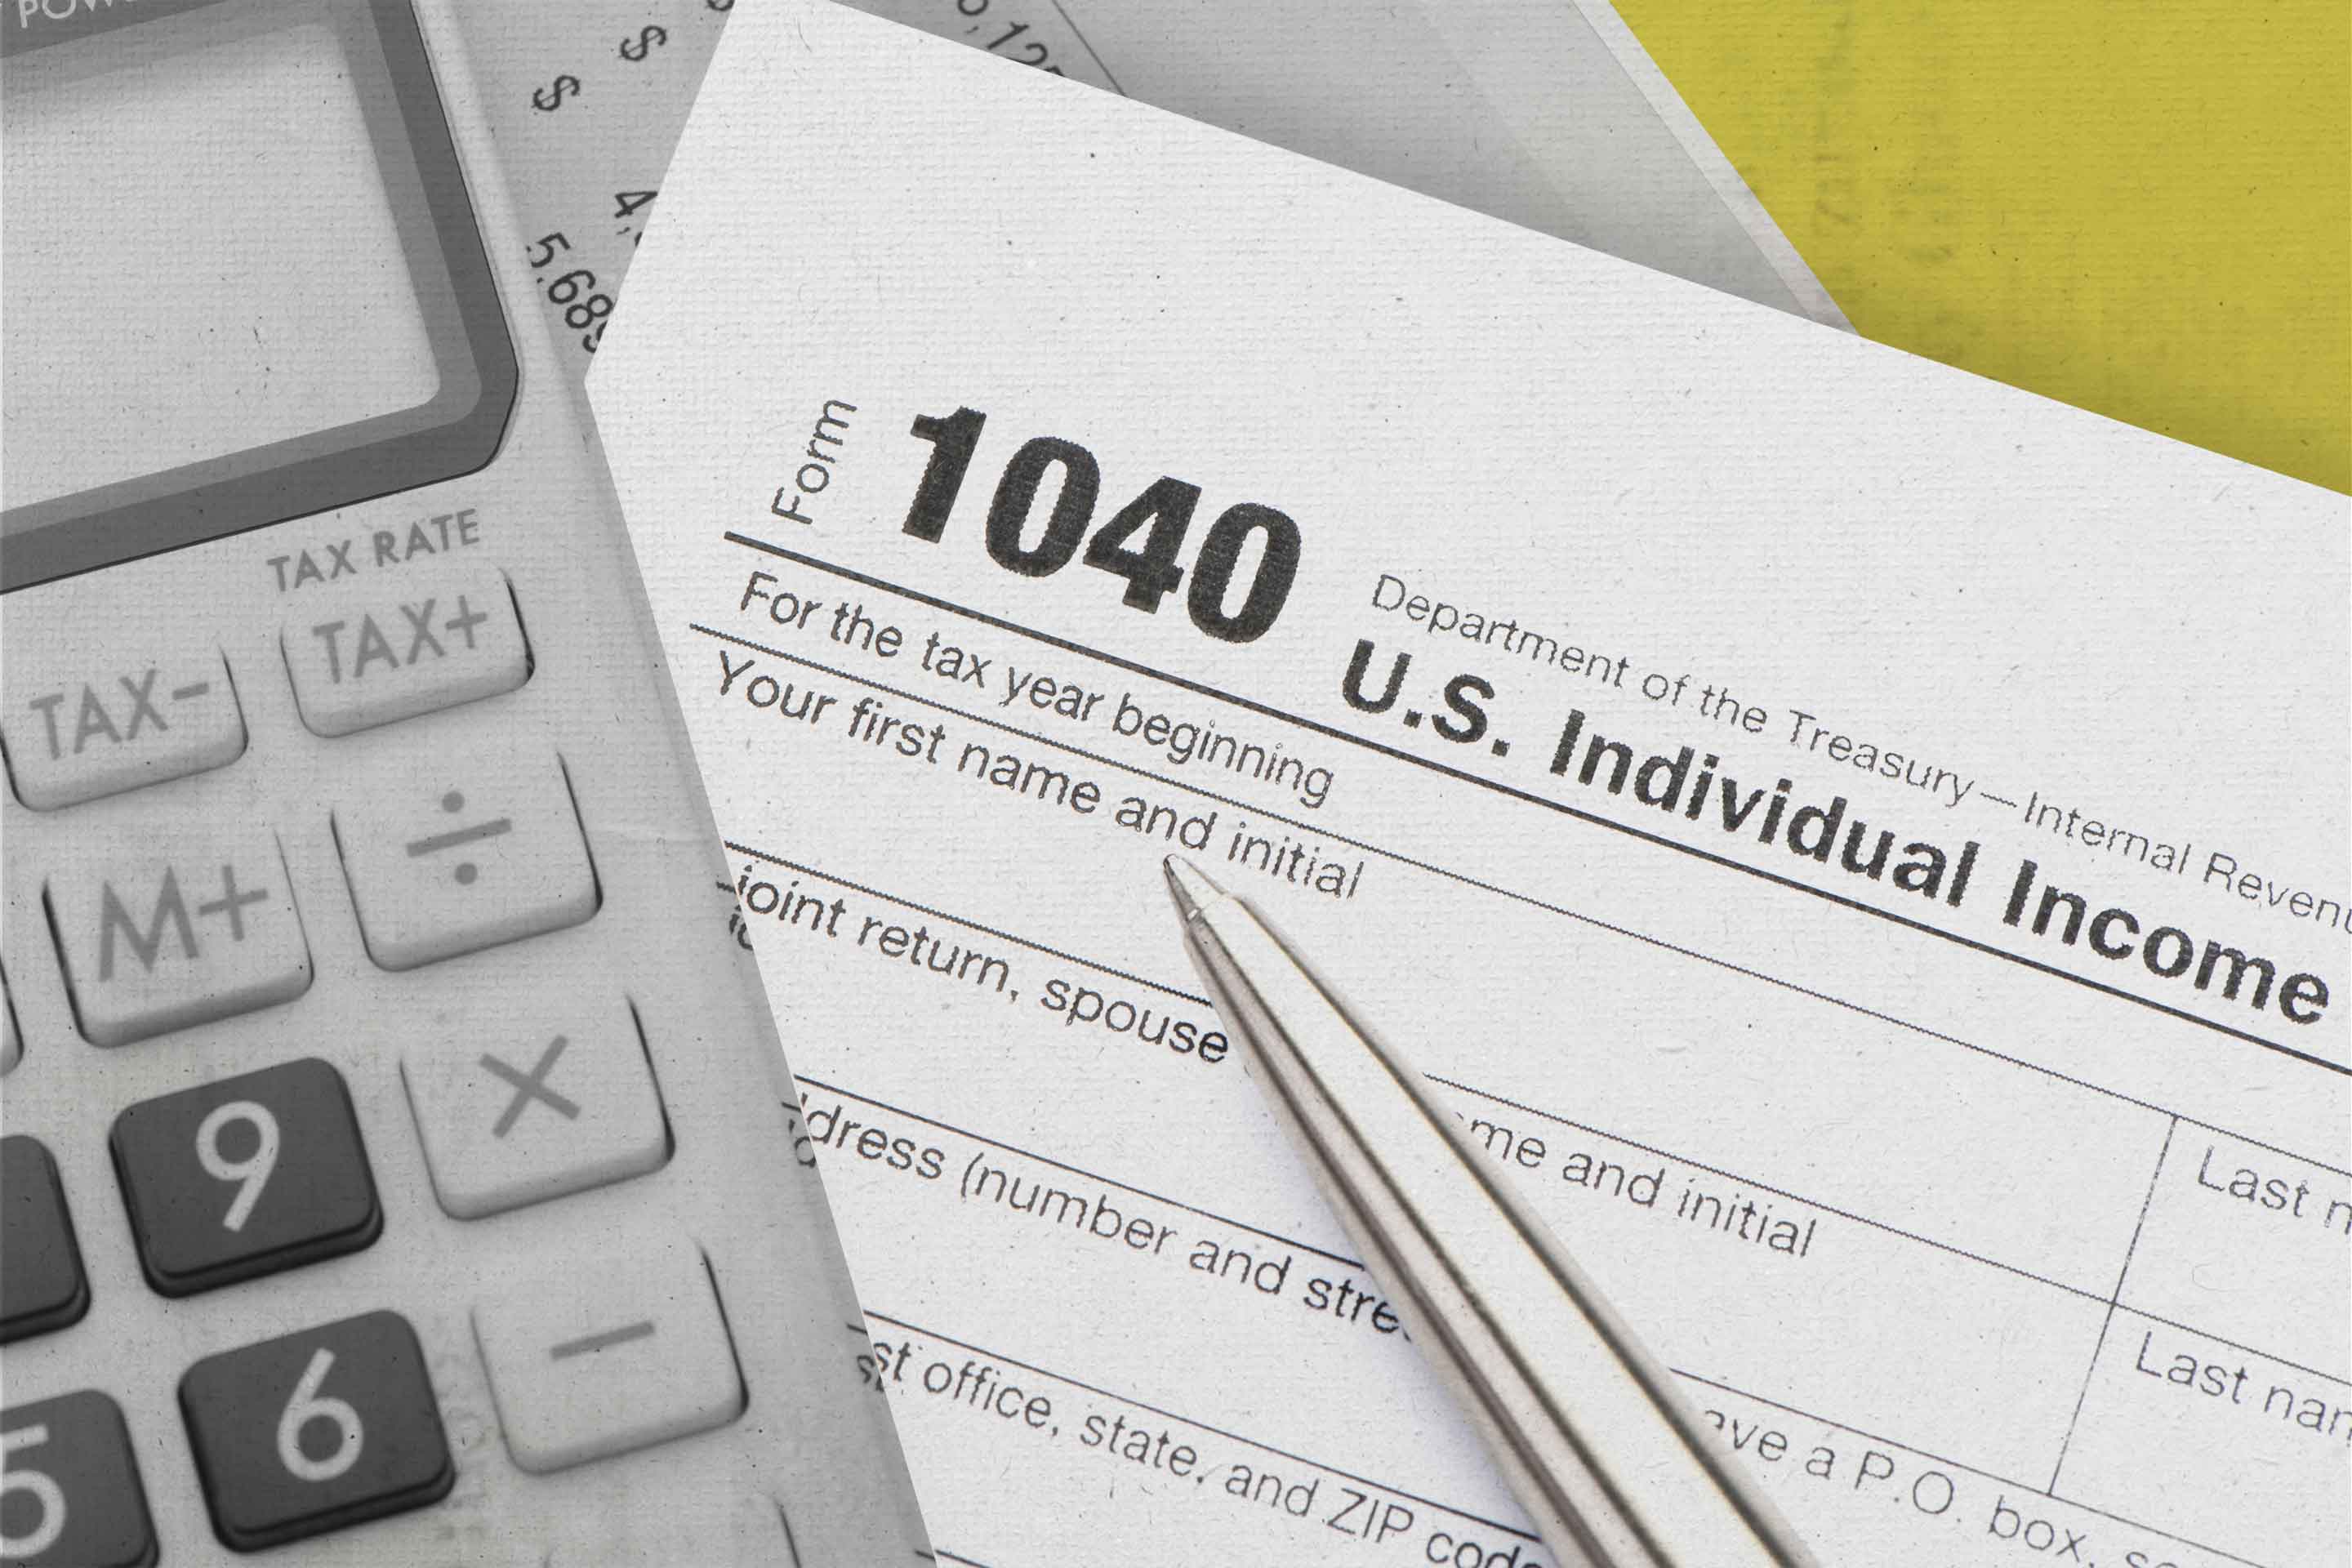 2023 Tax Brackets: You Might Owe the IRS Less Next Year Thanks to Inflation